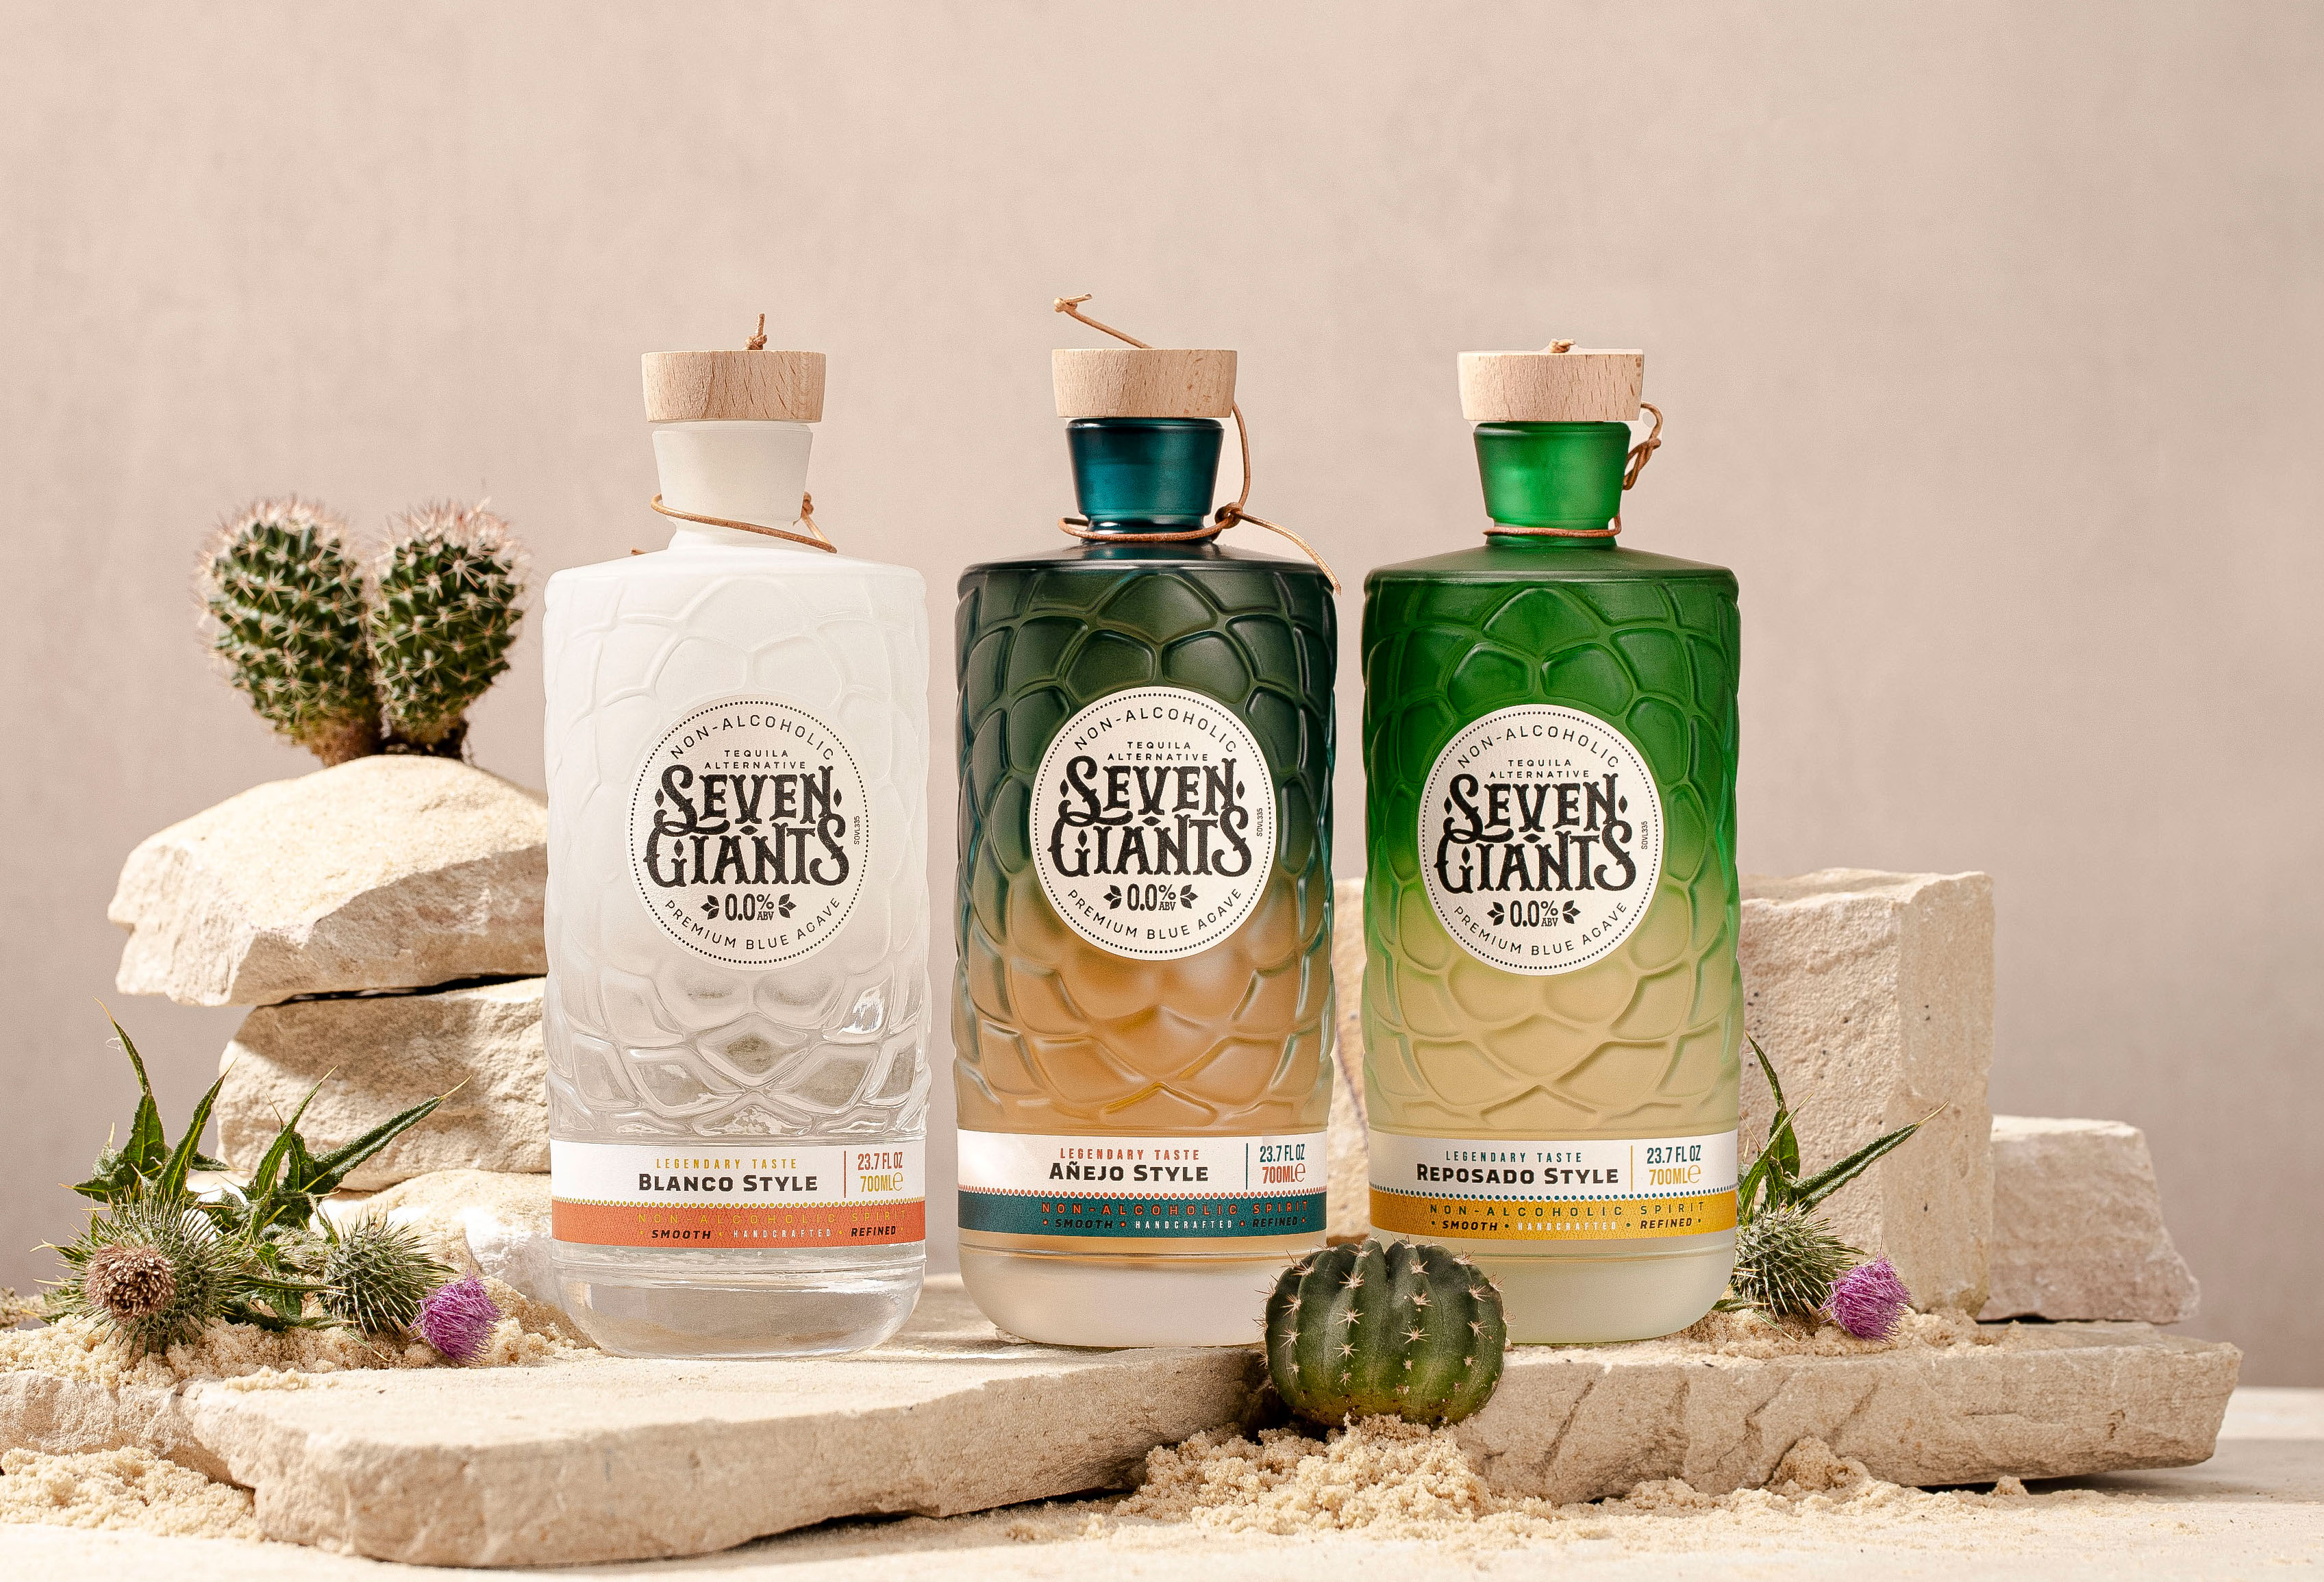 Seven Giants combines highland spring water that has percolated through the majestic Cairngorm mountains for over 50 years with organic blue Mexican agave